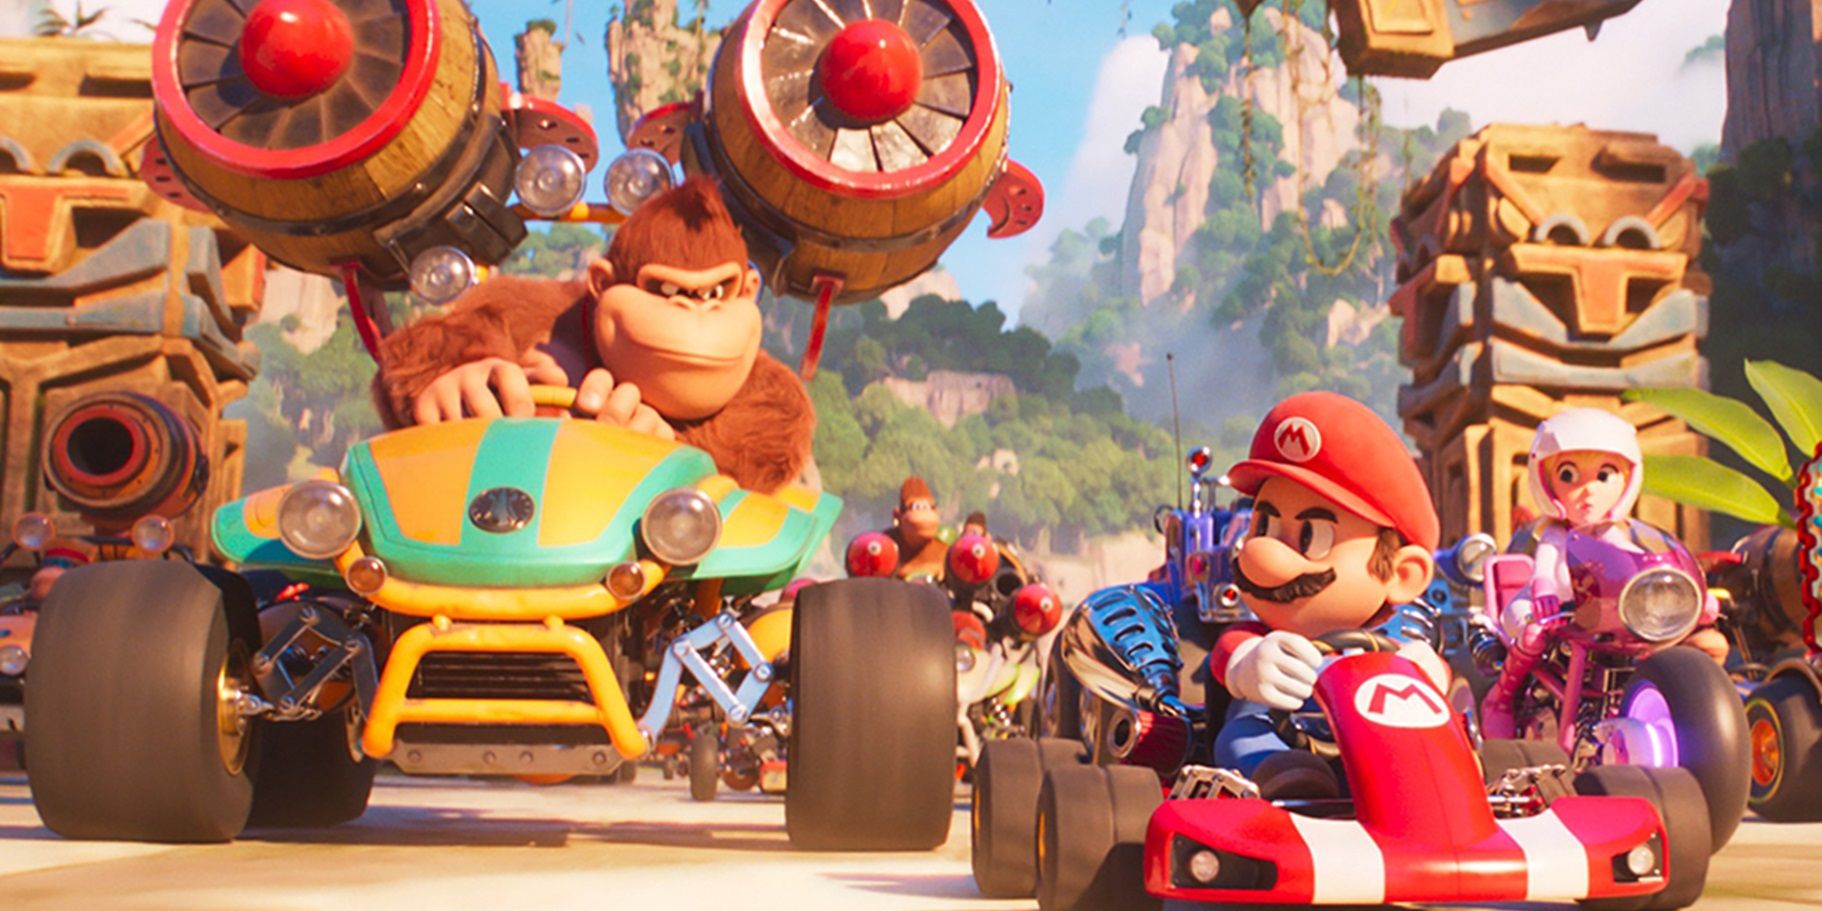 Mario and Donkey Kong at the starting line in The Super Mario Bros Movie